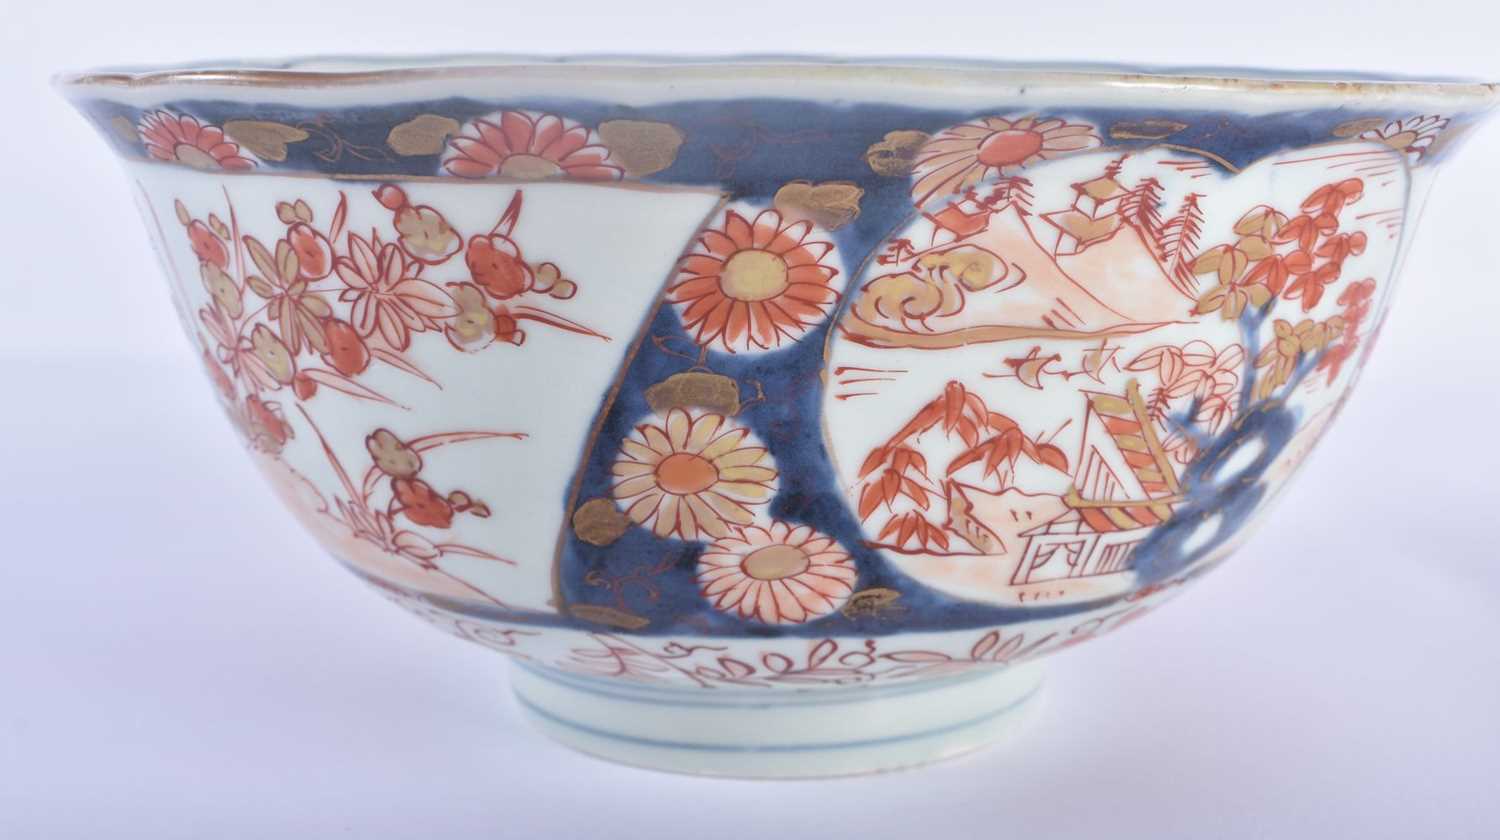 A LARGE 18TH CENTURY JAPANESE EDO PERIOD SCALLOPED IMARI BOWL painted with flowers. 24 cm x 10 cm. - Image 3 of 5